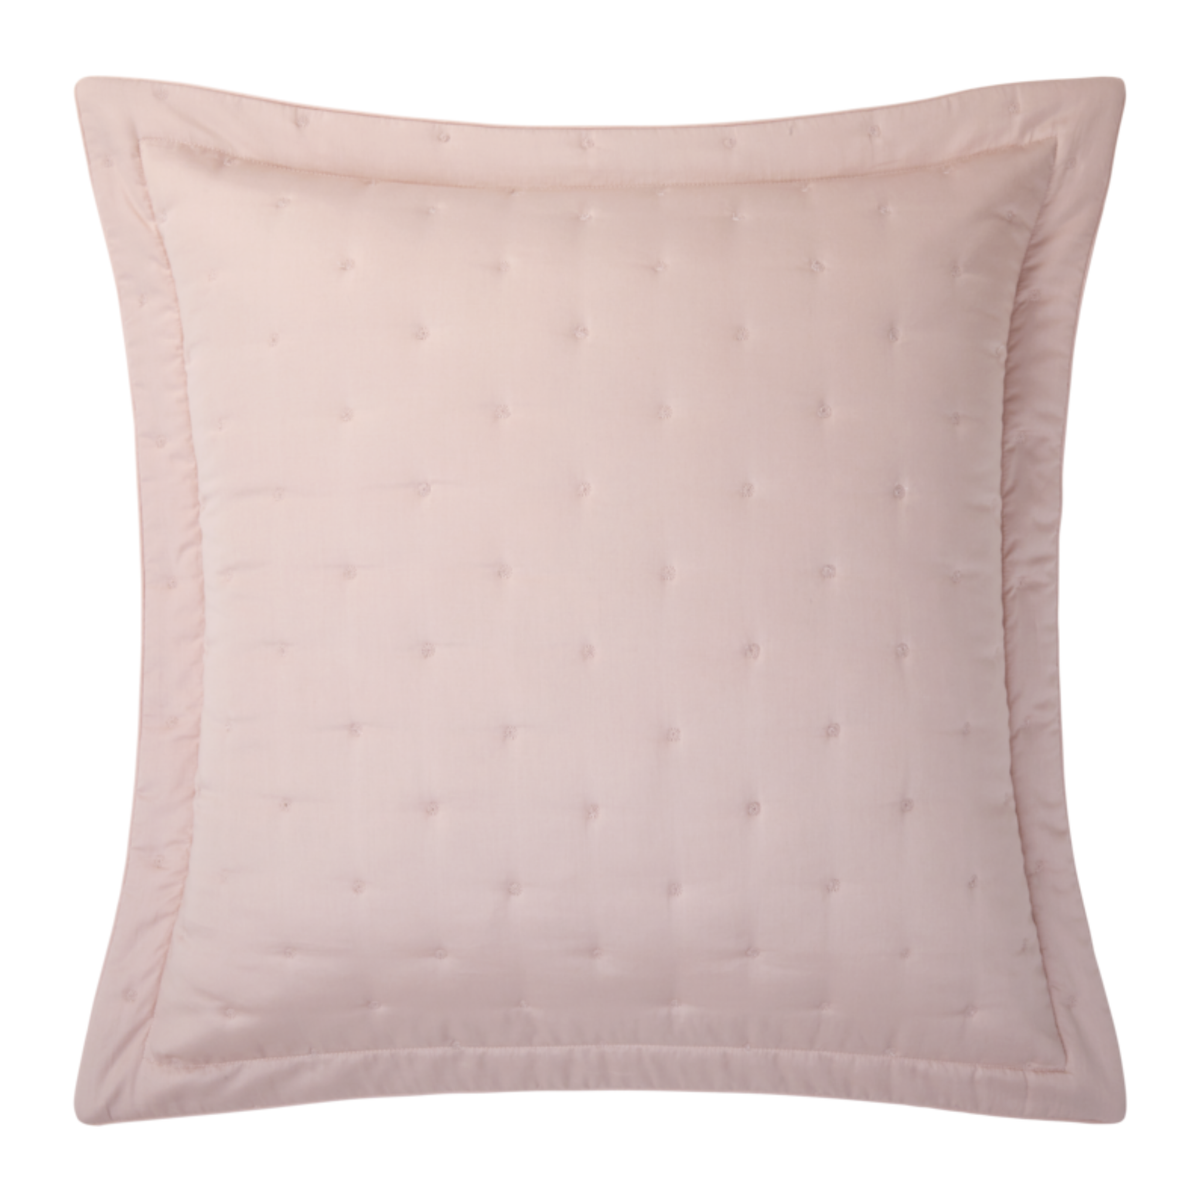 Euro Sham of Yves Delorme Quilted Triomphe Bedding in Poudre Color